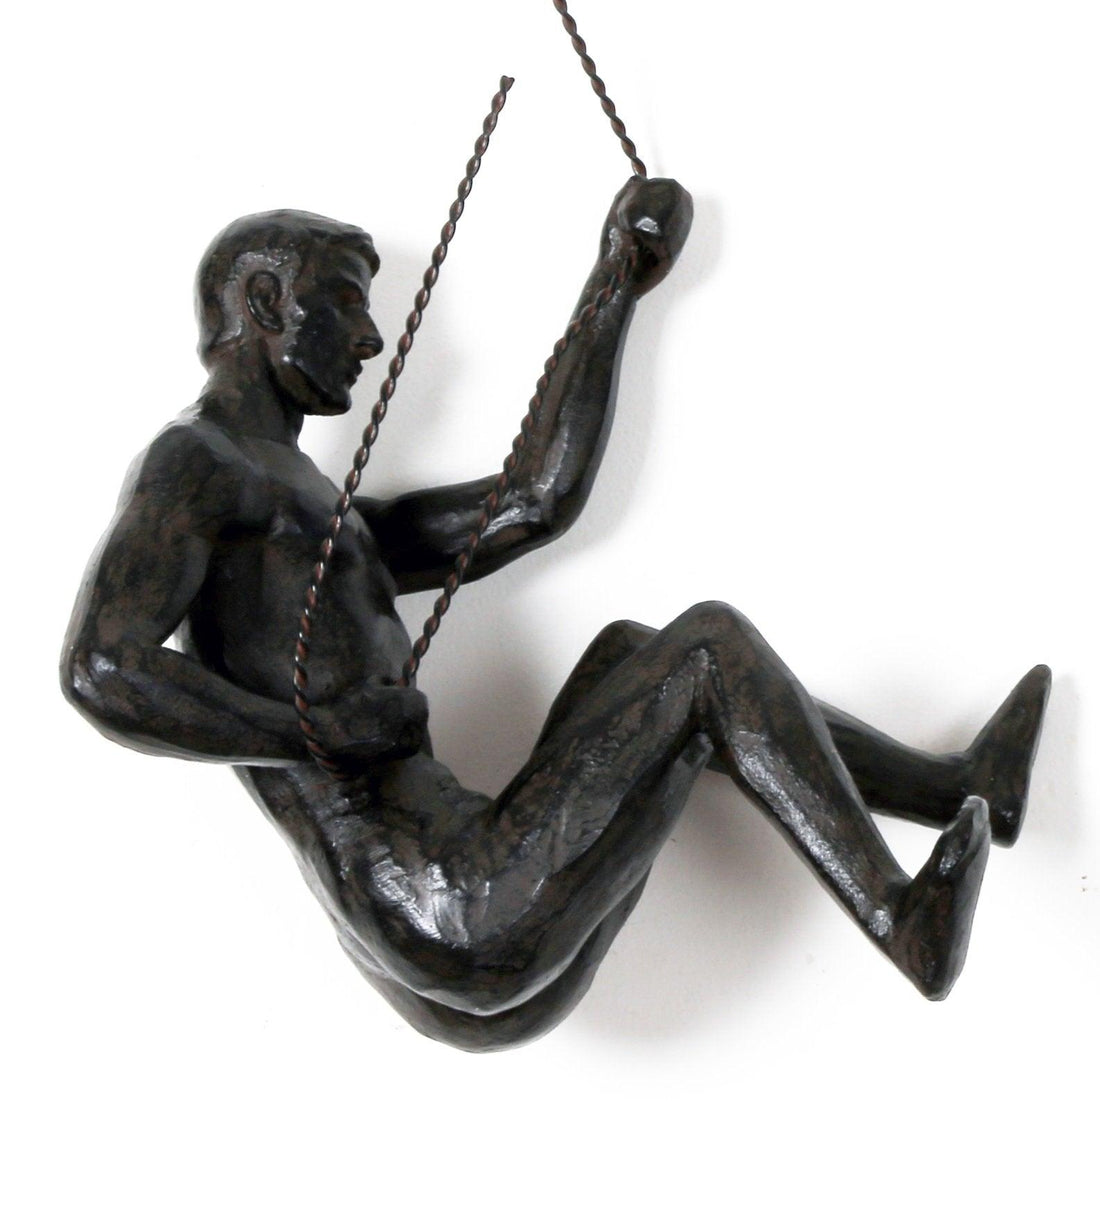 Abseiling Man Looking Down Ornament Black - £38.99 - Figurines & Statues 